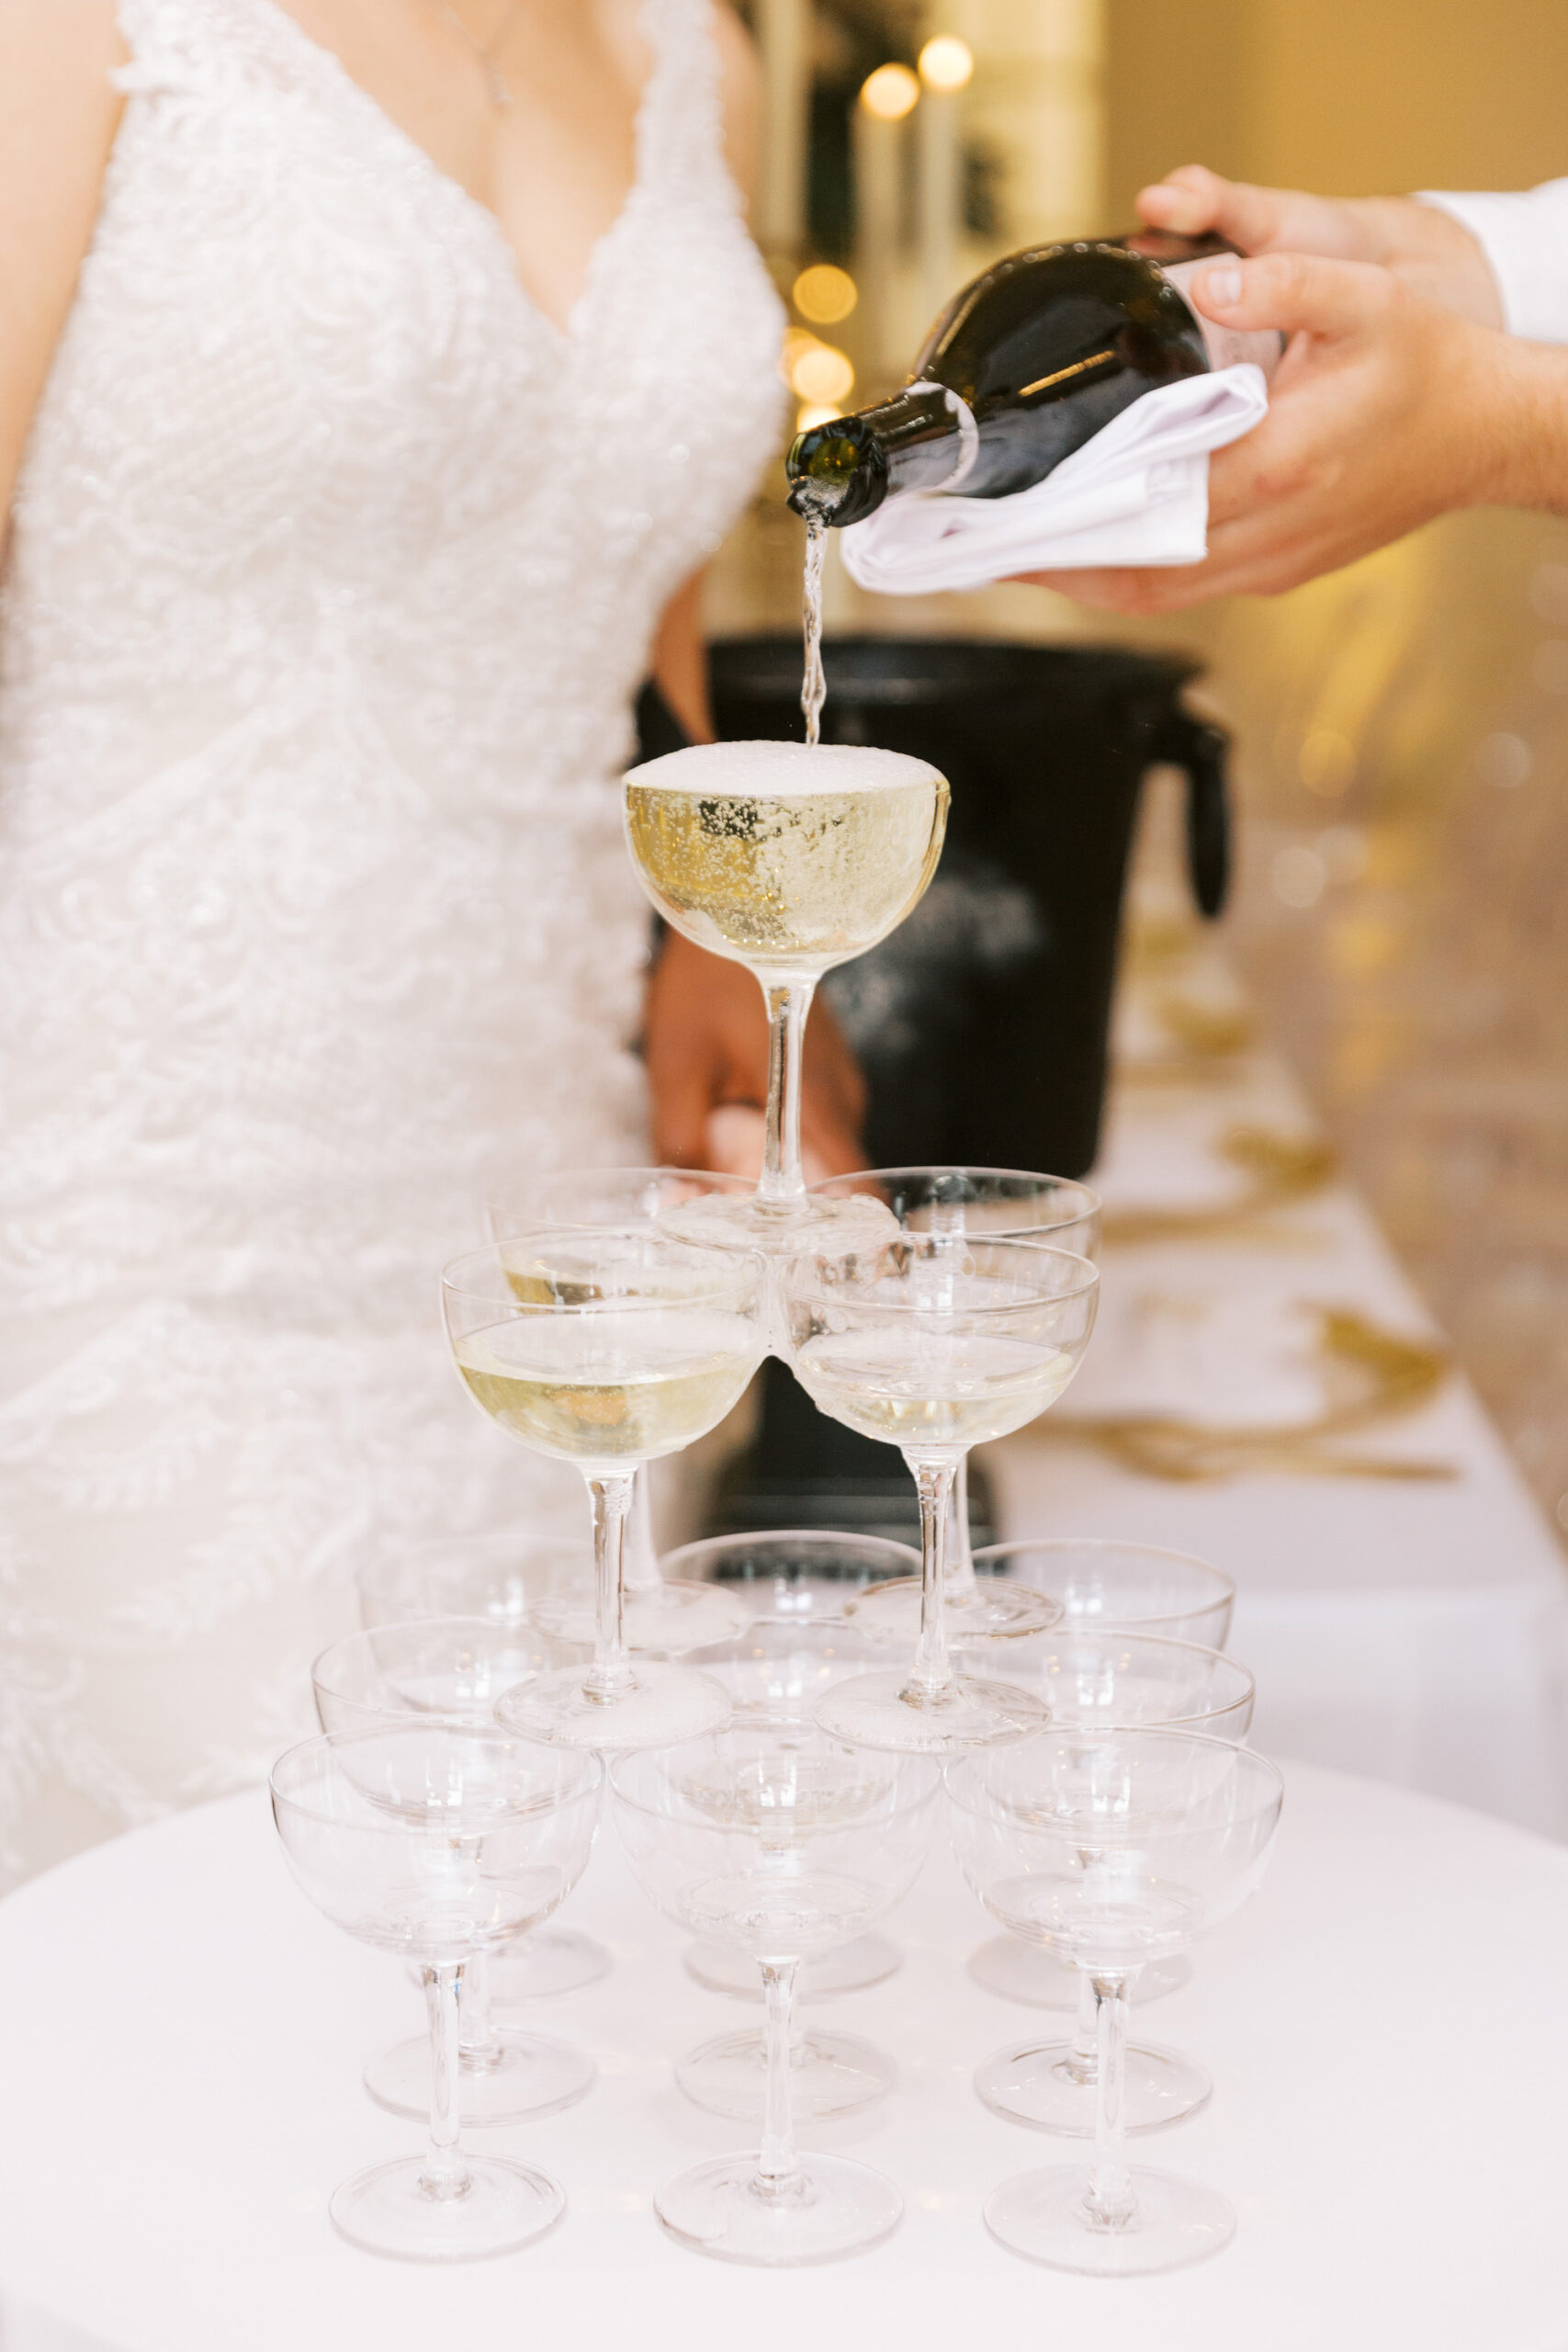 Champagne Tower at Vintage Old Hollywood Gatsby Inspired Wedding Reception